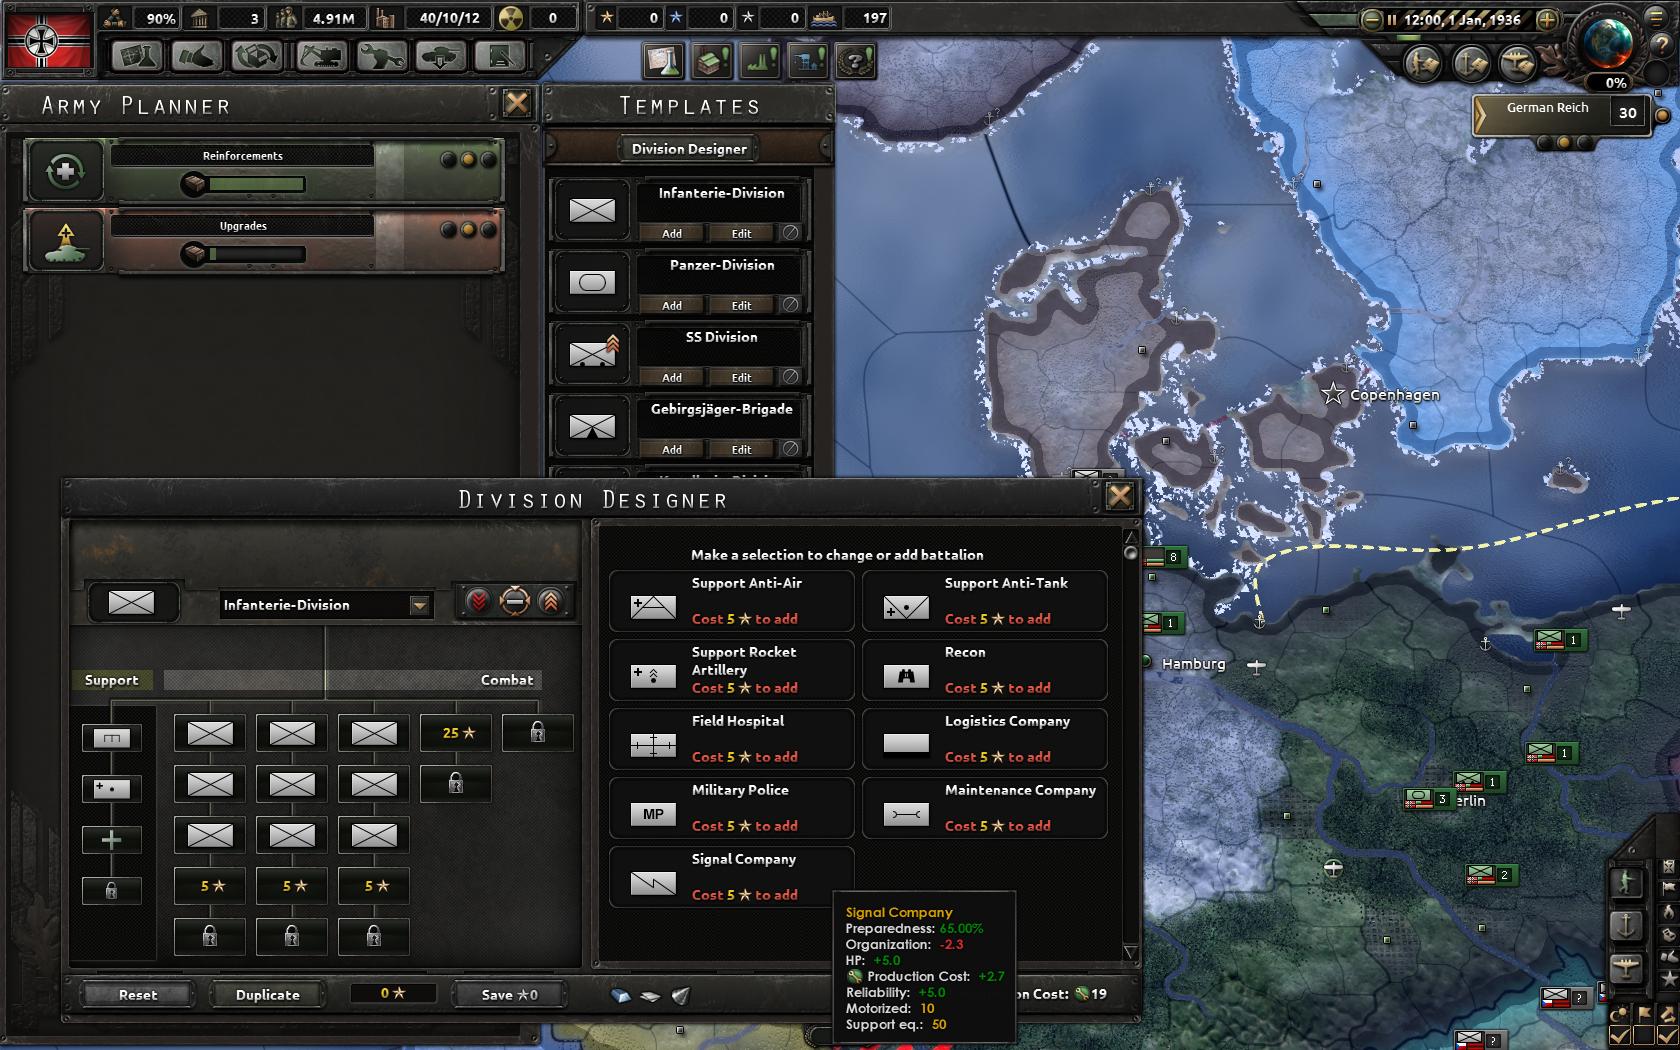 hearts of iron 4 support companies